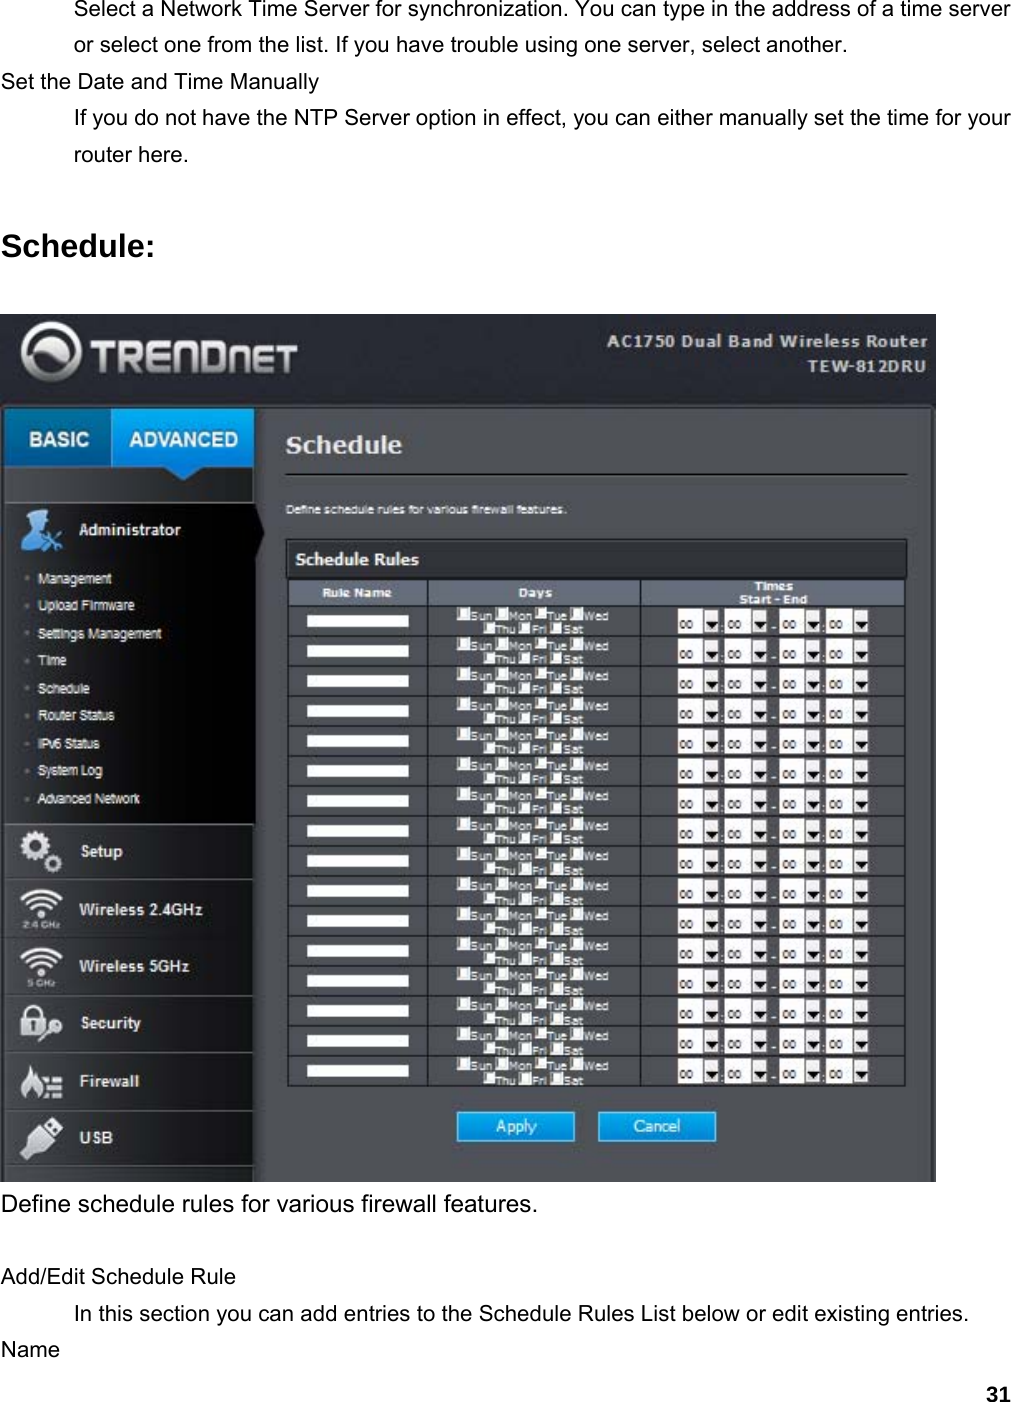 31 Select a Network Time Server for synchronization. You can type in the address of a time server or select one from the list. If you have trouble using one server, select another.   Set the Date and Time Manually   If you do not have the NTP Server option in effect, you can either manually set the time for your router here. Schedule:  Define schedule rules for various firewall features.  Add/Edit Schedule Rule   In this section you can add entries to the Schedule Rules List below or edit existing entries.   Name  